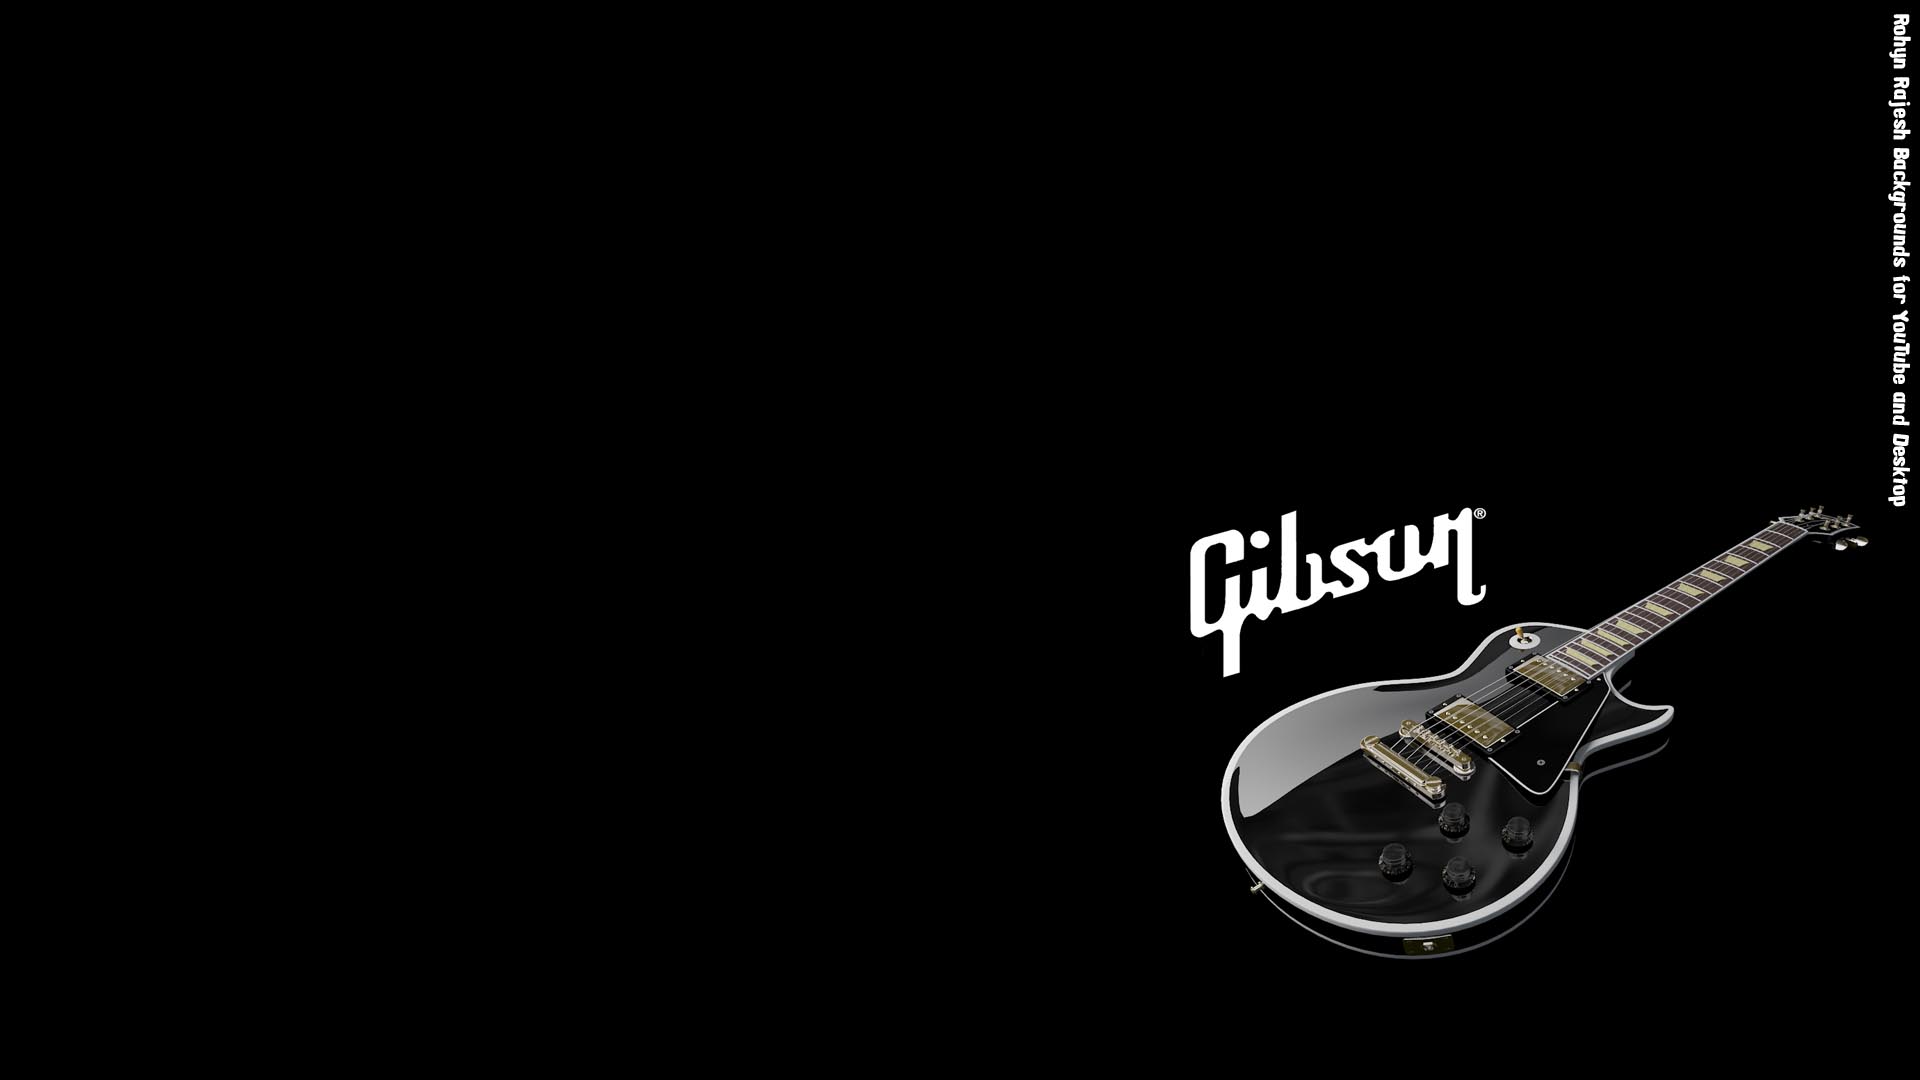 Les Paul Gibson HD Background By Rohynrajesh Customization Wallpaper